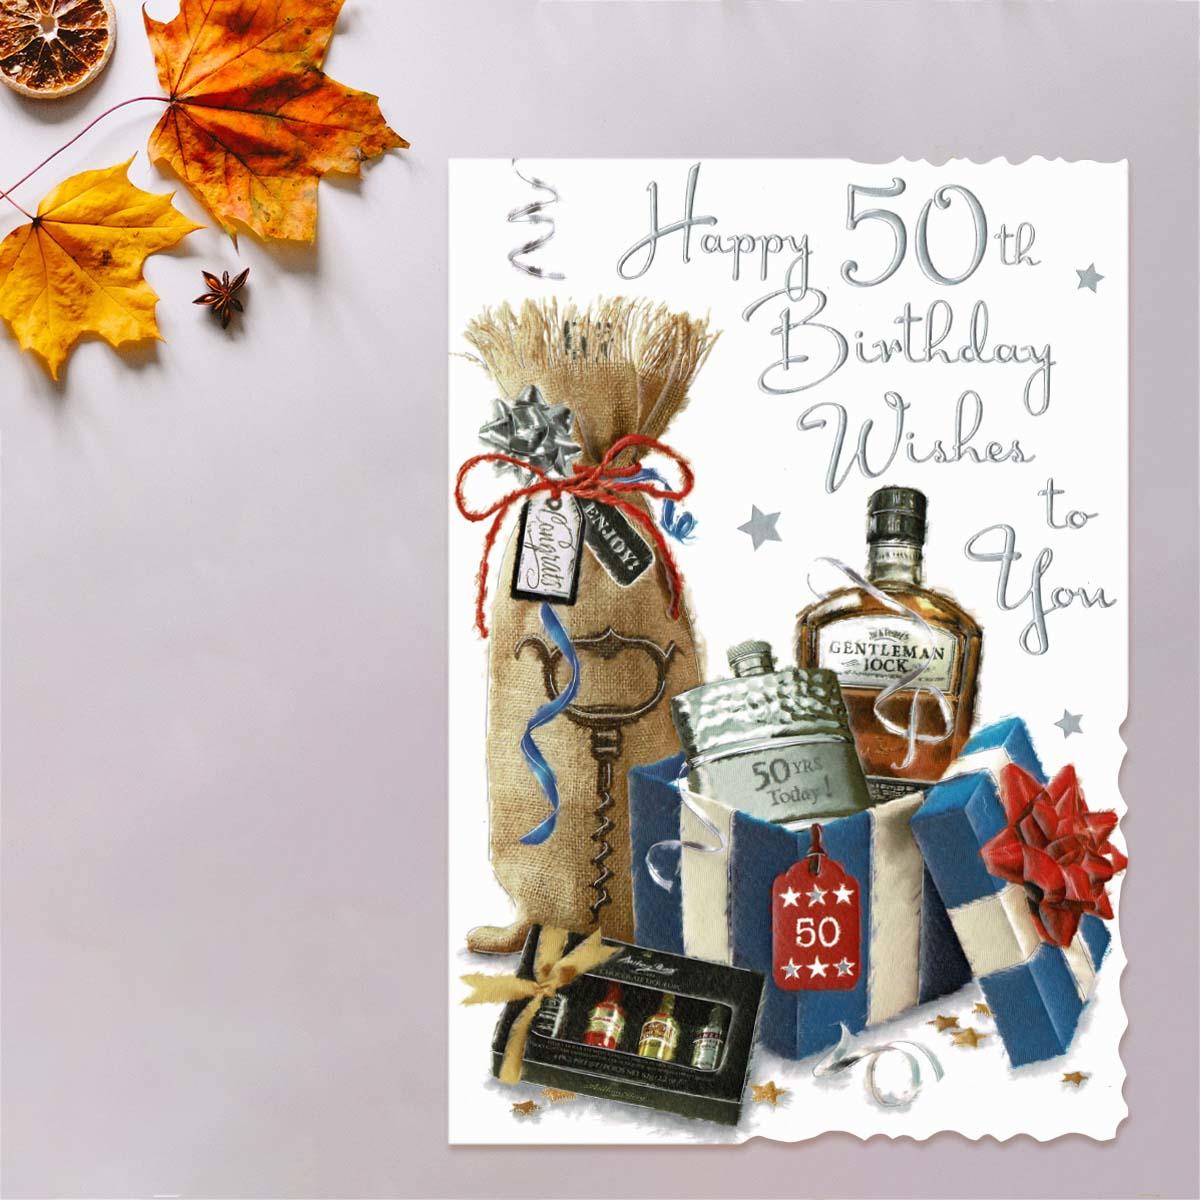 Happy 50th Birthday Wishes Card Front Image